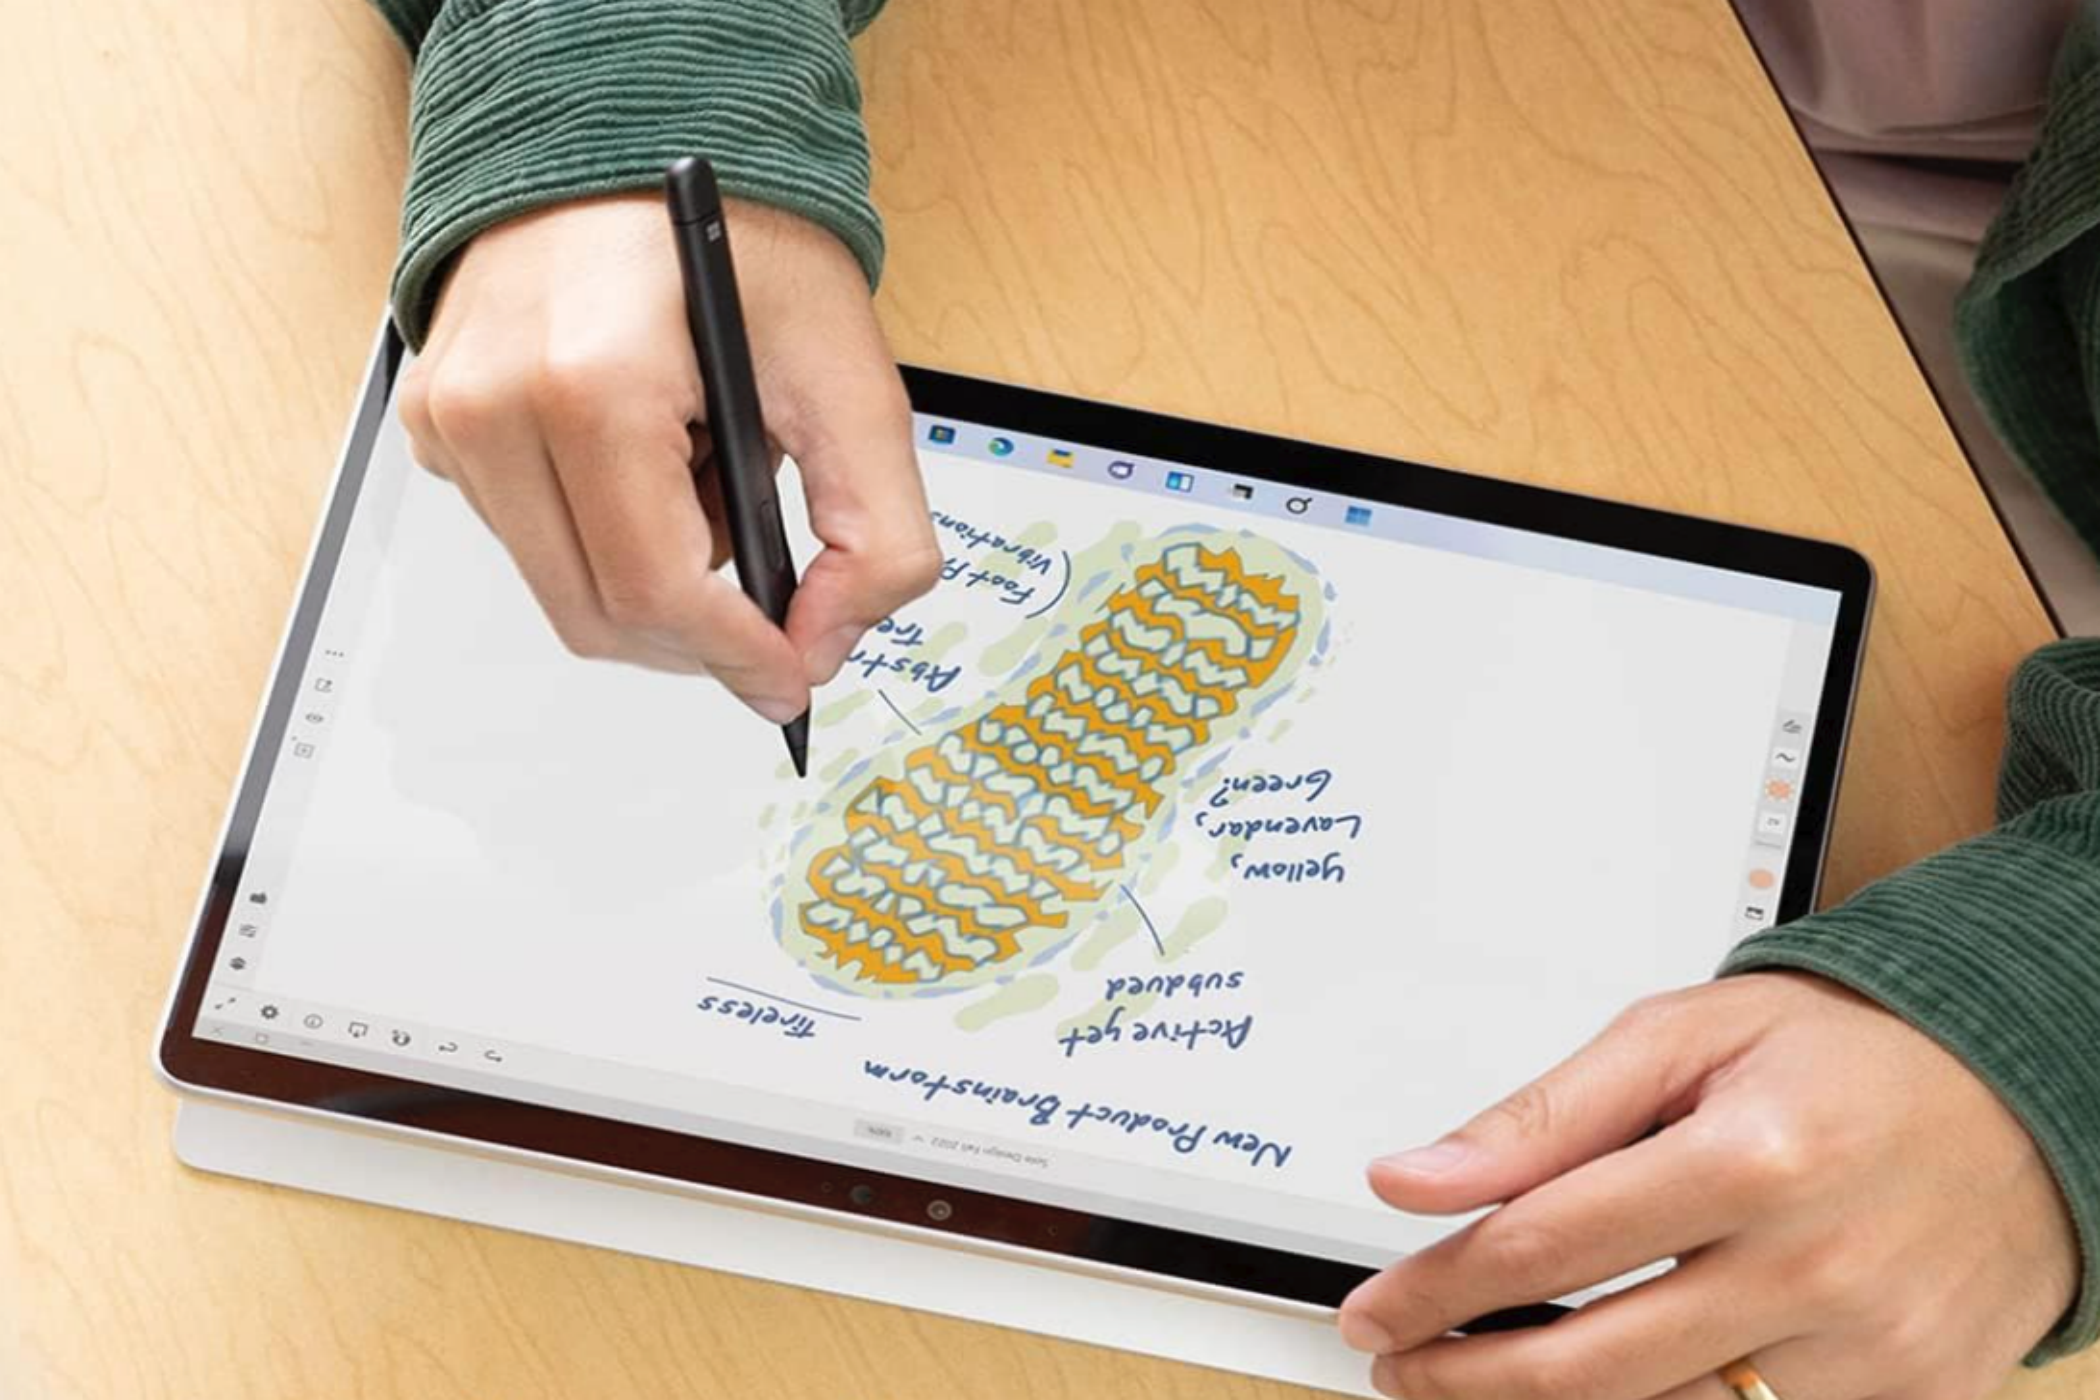 A man adding notes to a sketch on the Microsoft Surface Pro 9 tablet.